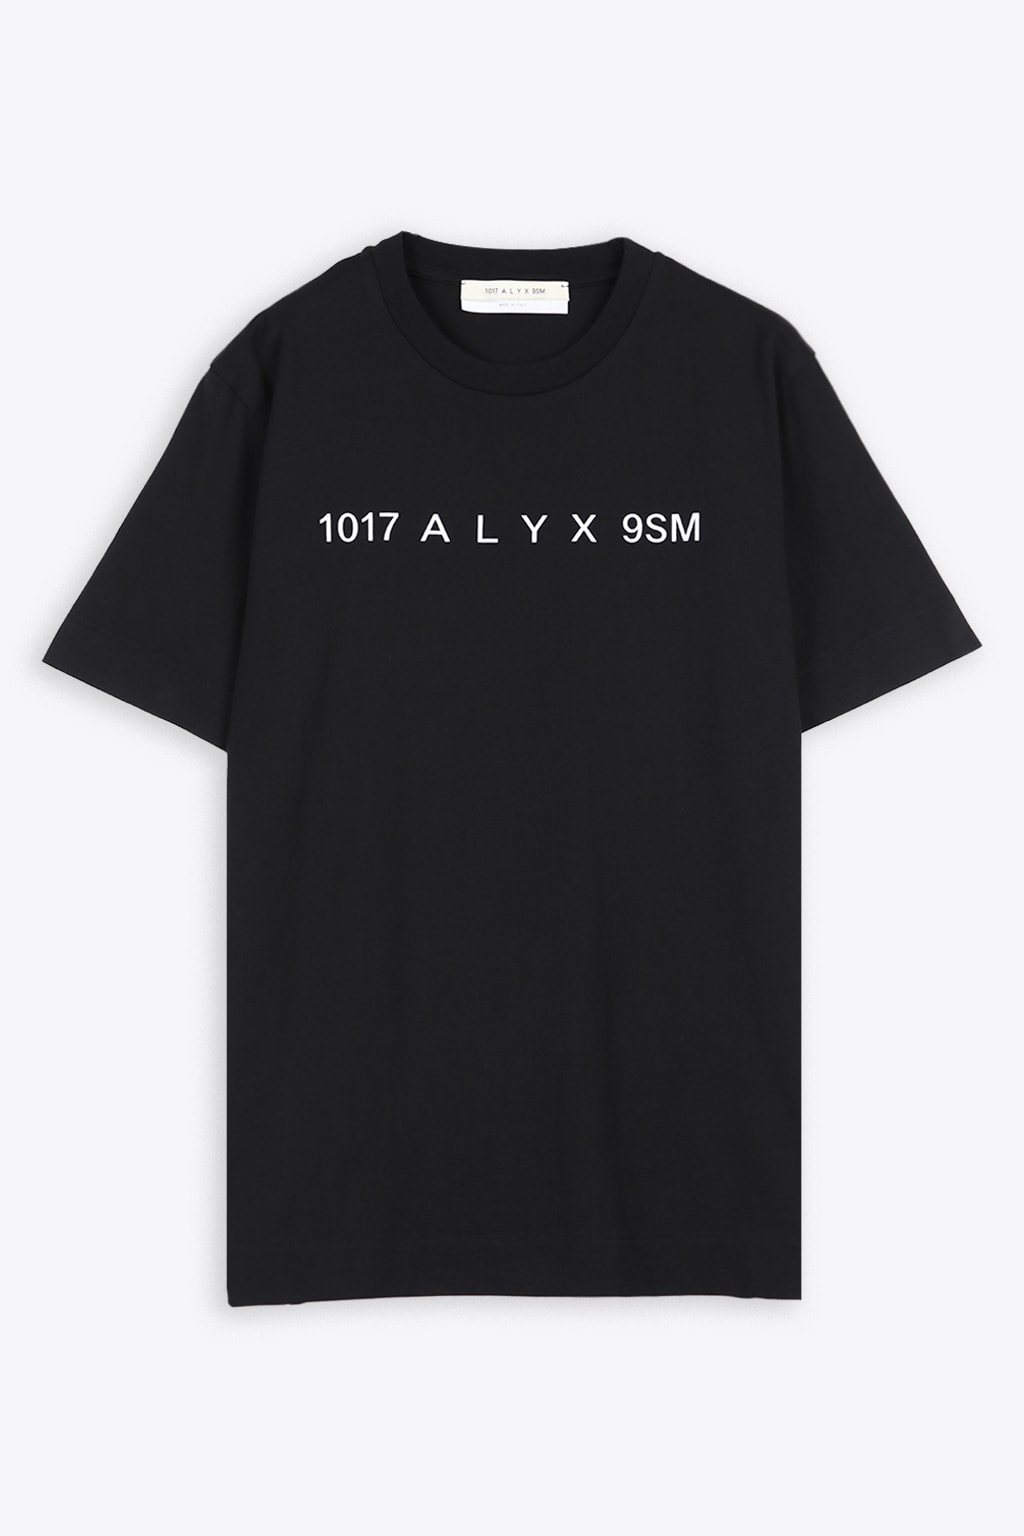 ALYX COLLECTION LOGO S/S TEE BLACK COTTON T-SHIRT WITH FRONT LOGO - COLLECTION LOGO TEE